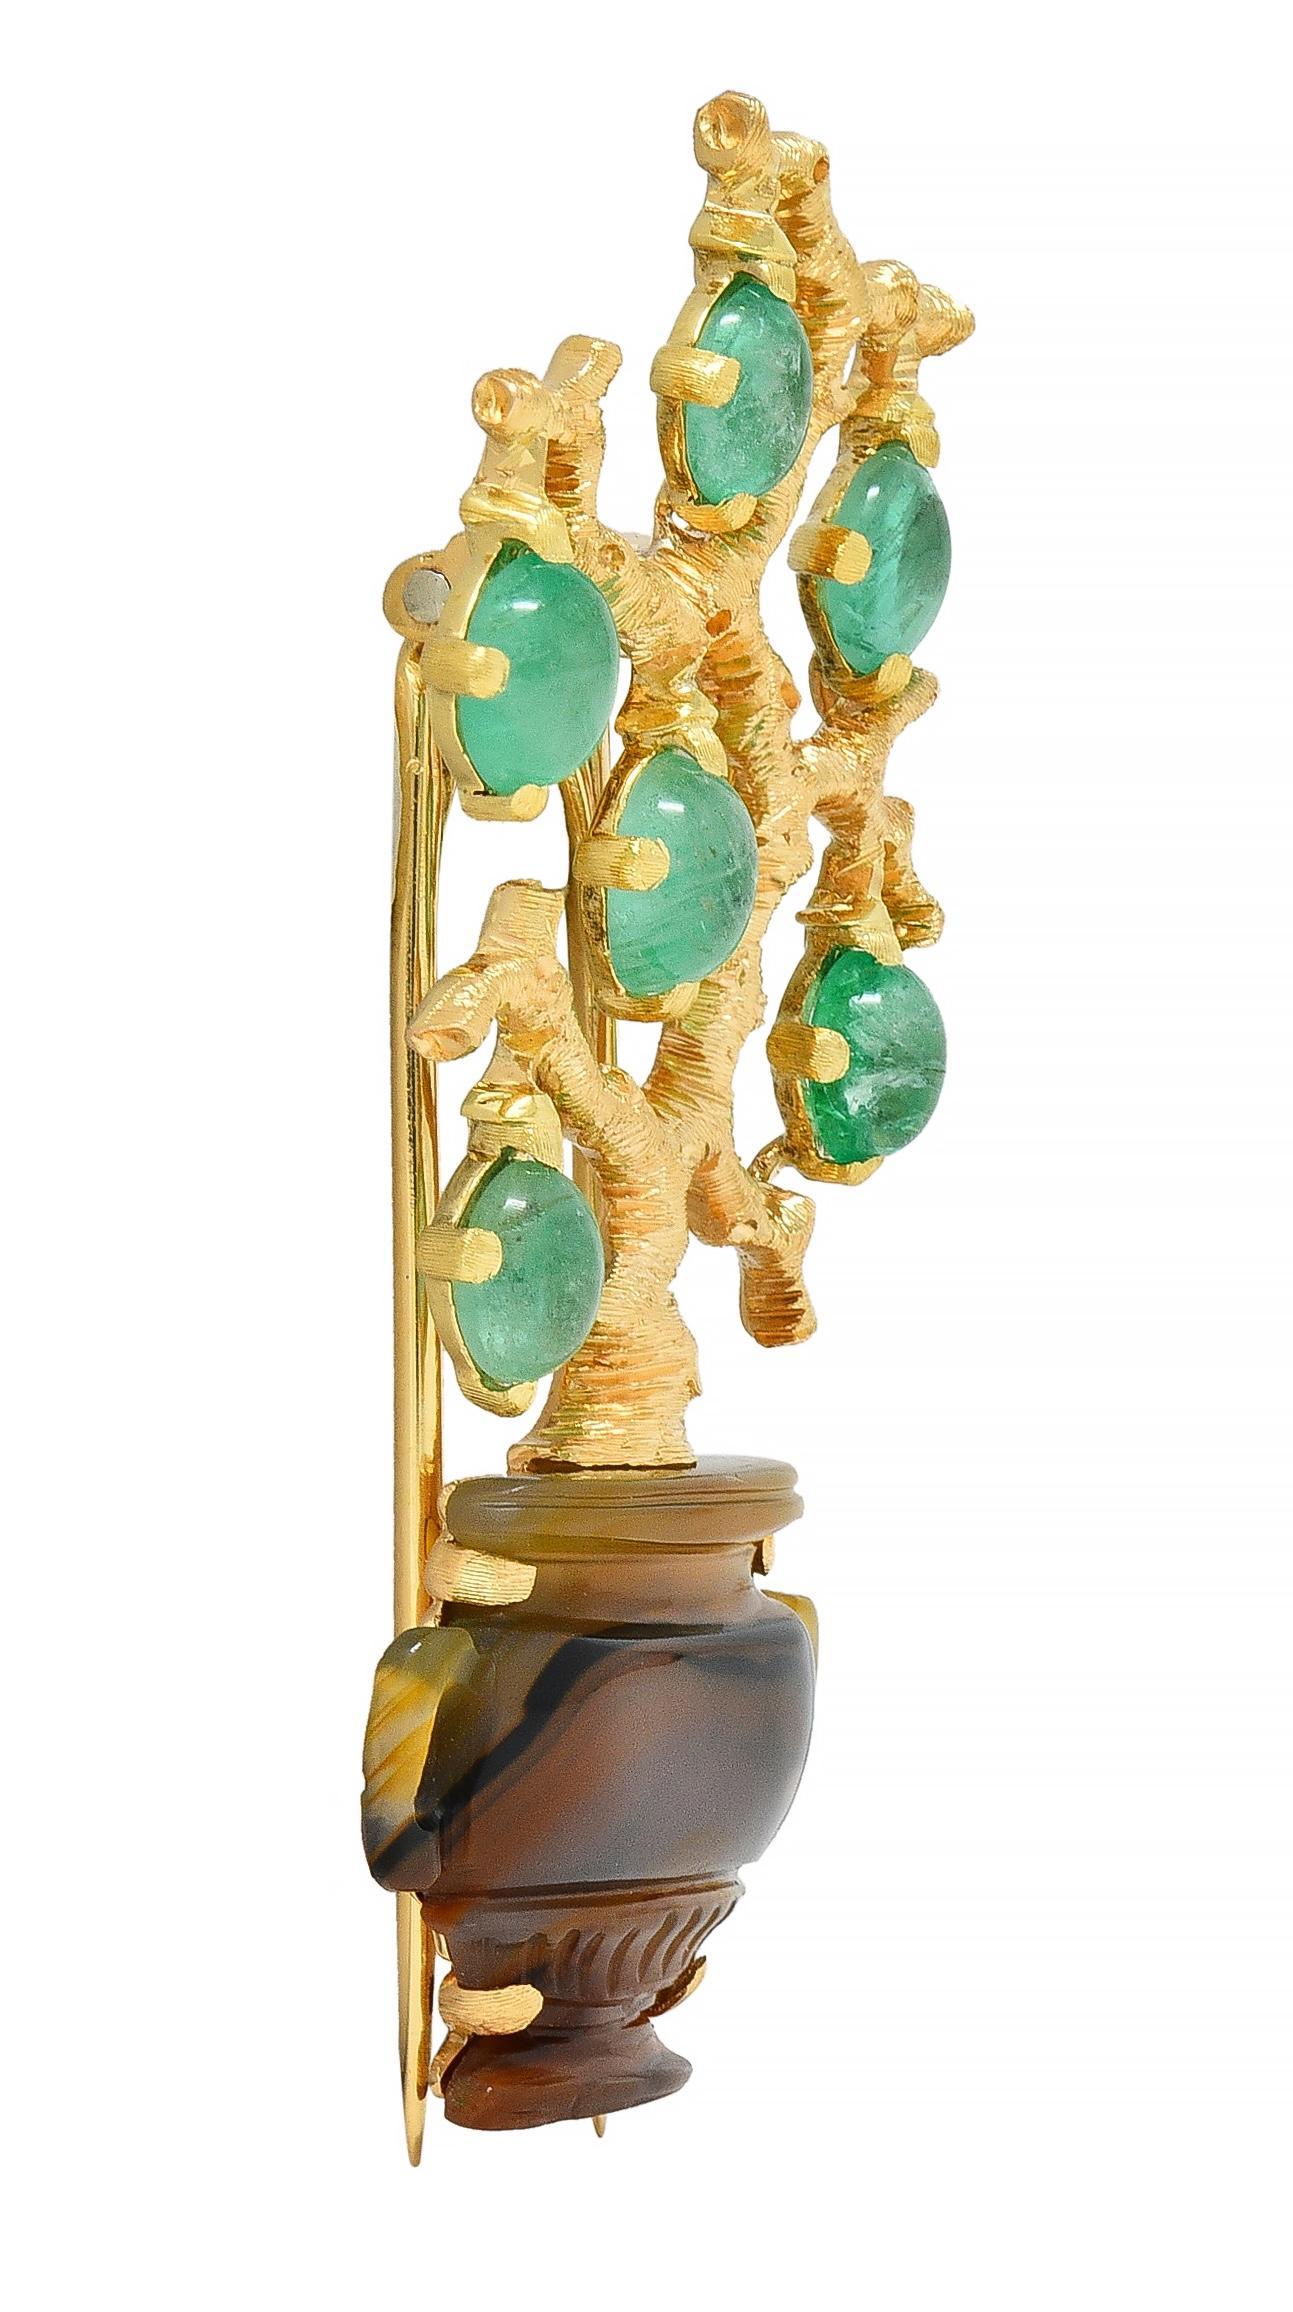 Designed as a potted gold tree with organically textured branches suspending emerald cabochon fruits
Weighing approximately 2.70 carats total - transparent light green in color and prong set
Pot is made of carved agate with engraved details and